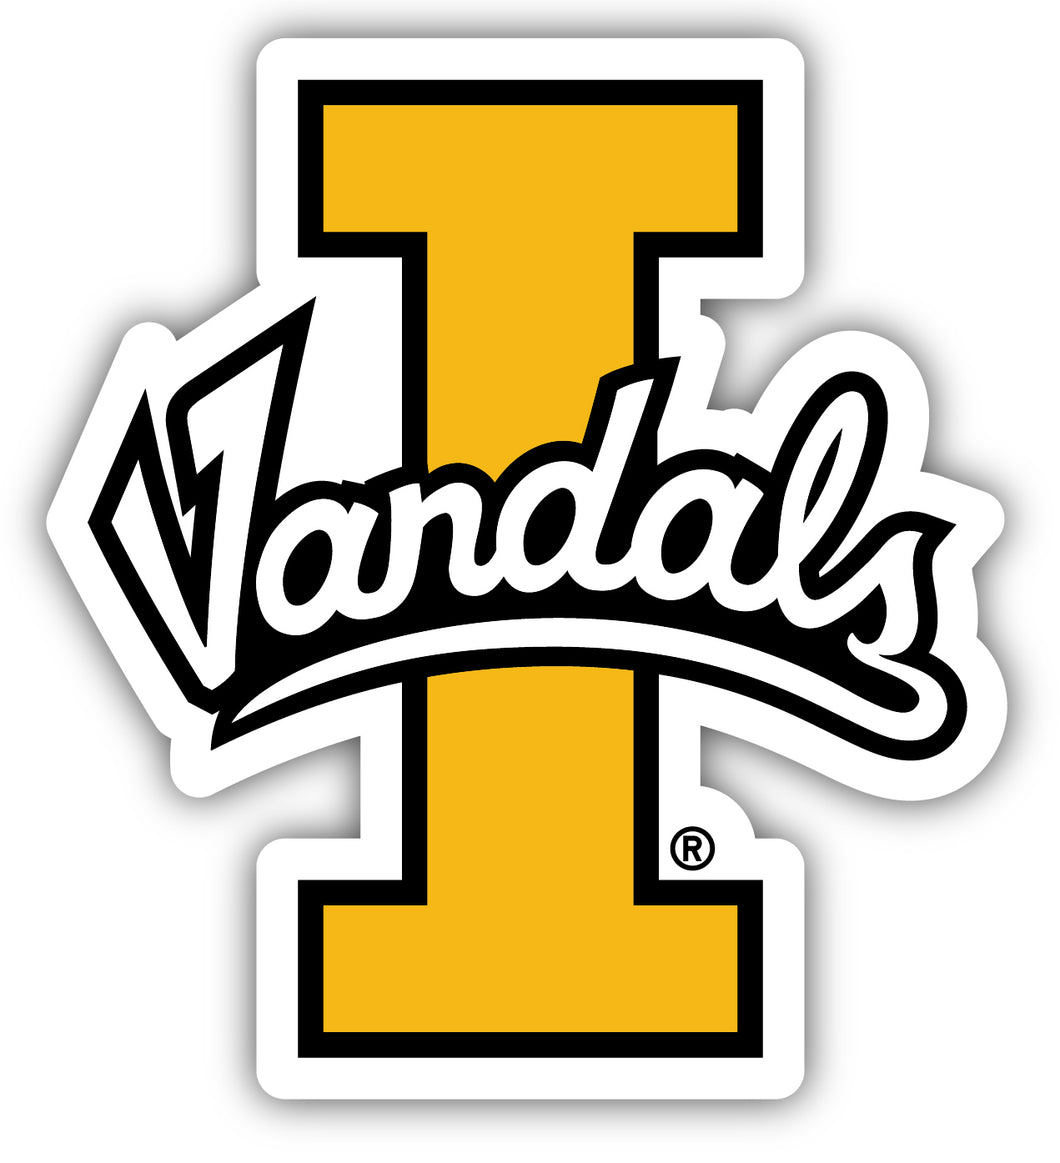 Idaho Vandals 4 Inch Vinyl Decal Magnet Officially Licensed Collegiate Product